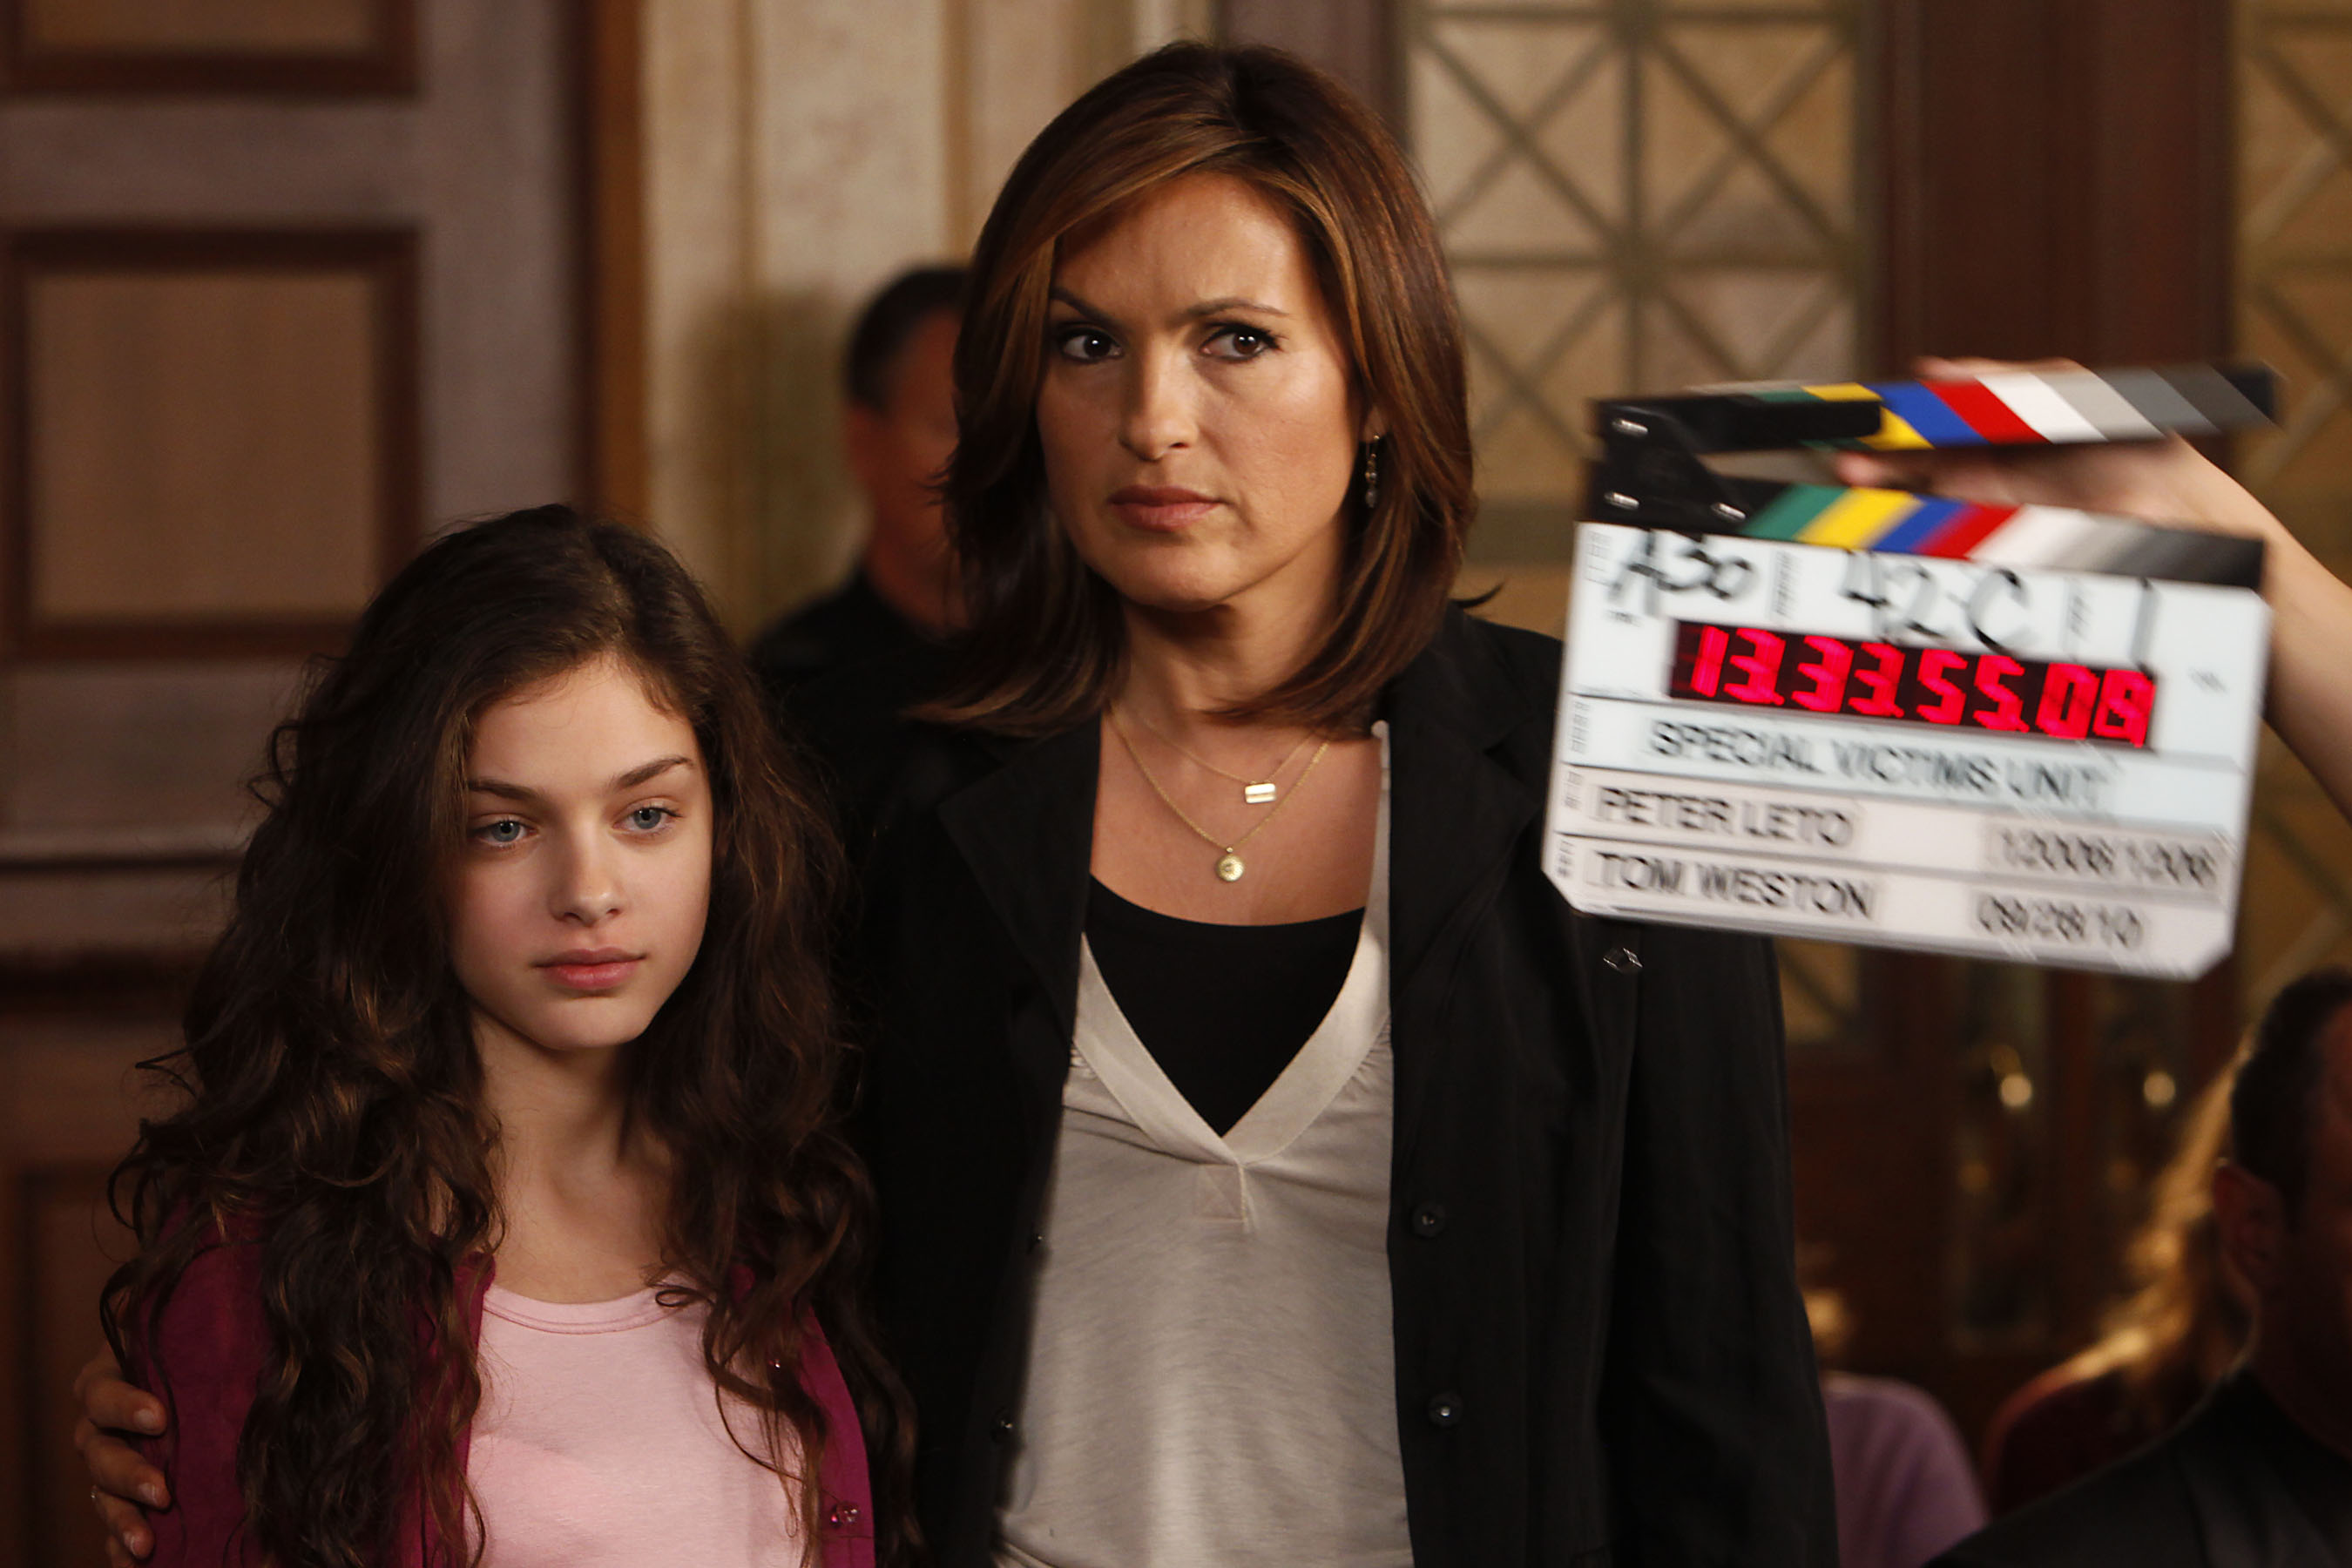 Behind The Scenes photo of Mariska Hargitay and Odeya Rush on the set of Law & Order: Special Victims Unit